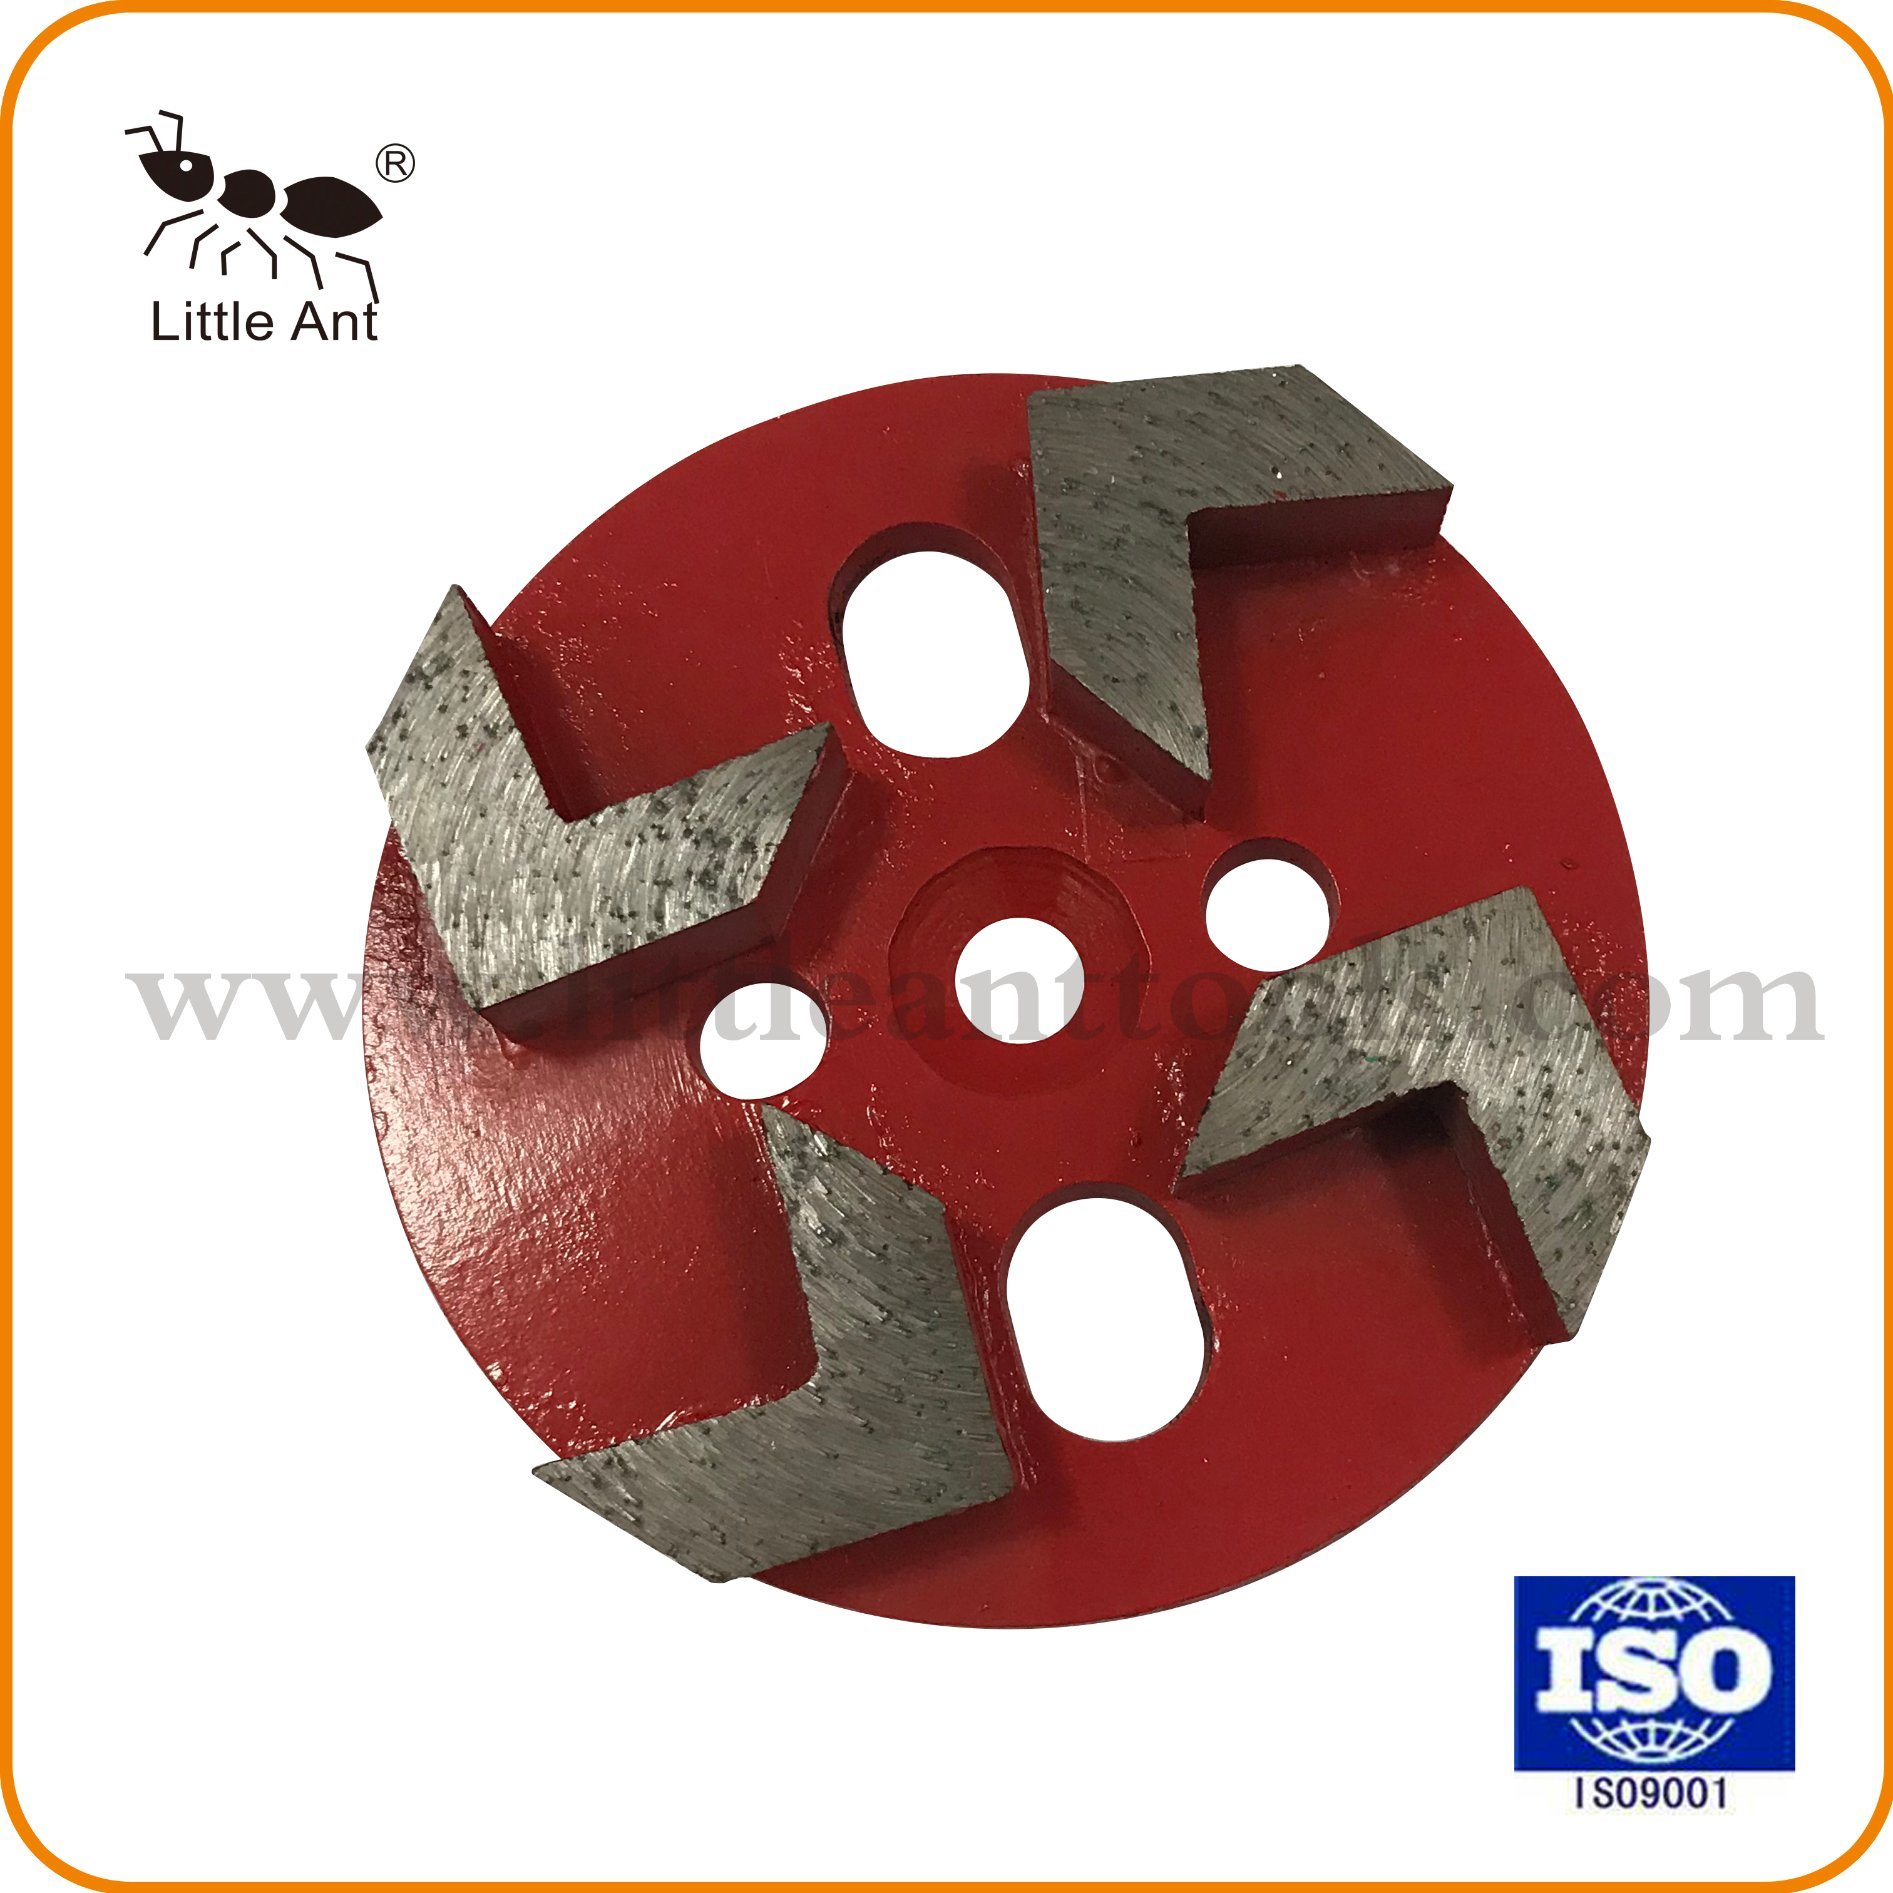 4 Arrow Type Diamond Grinding Plate, Grinding Wheel for Stone Materials